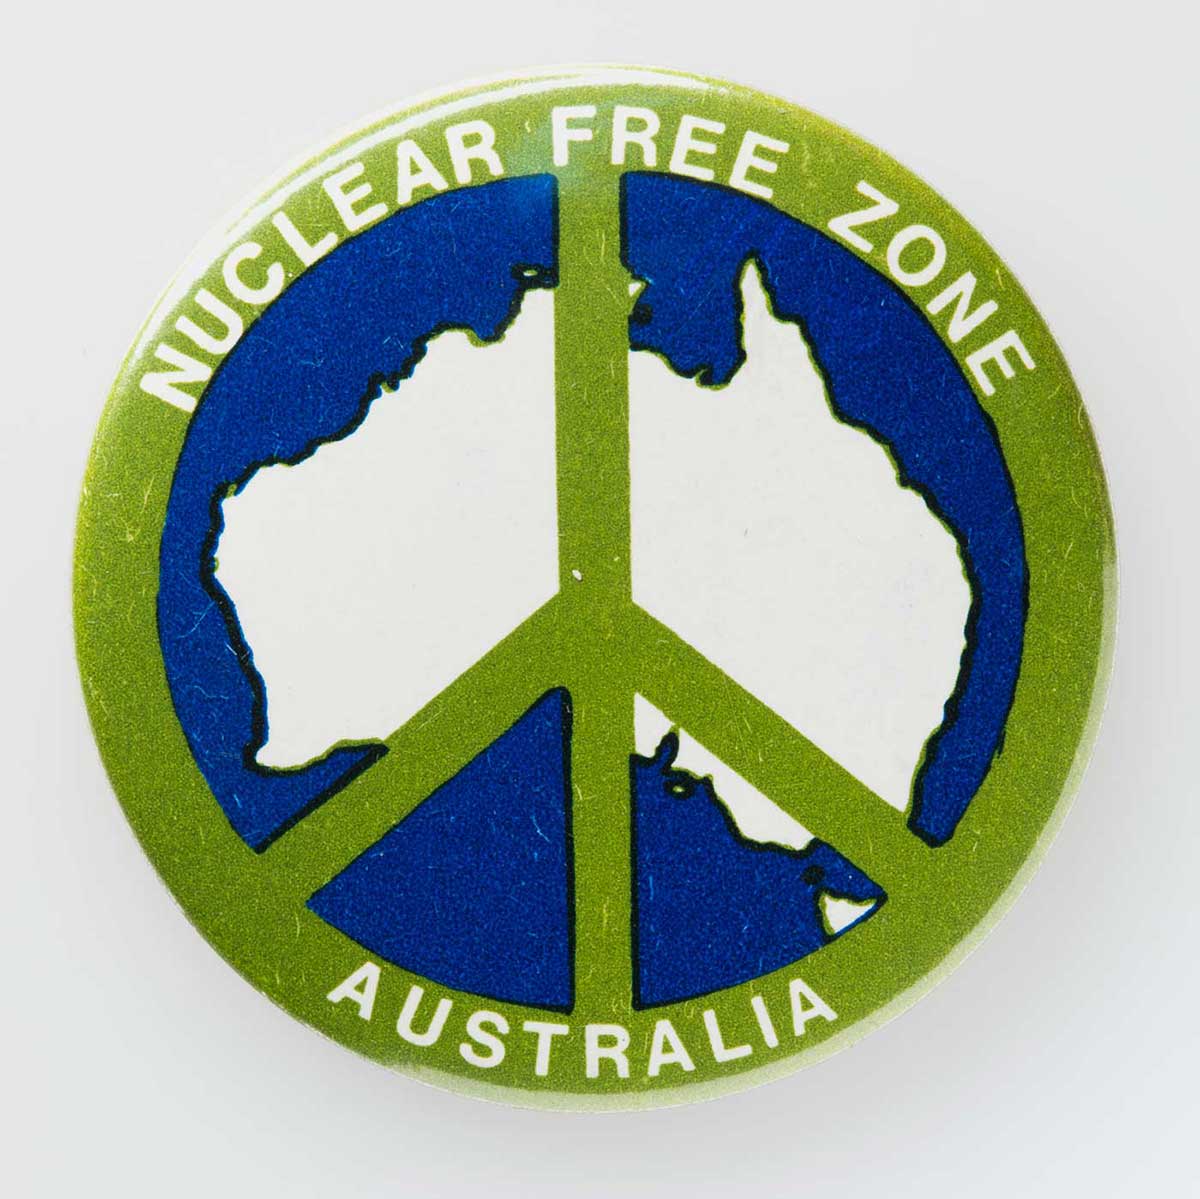 Colour photo of a badge featuring an illustration of a peace sign overlapping the Australian continent. On the edge of the badge is the text ‘NUCLEAR FREE ZONE’. - click to view larger image